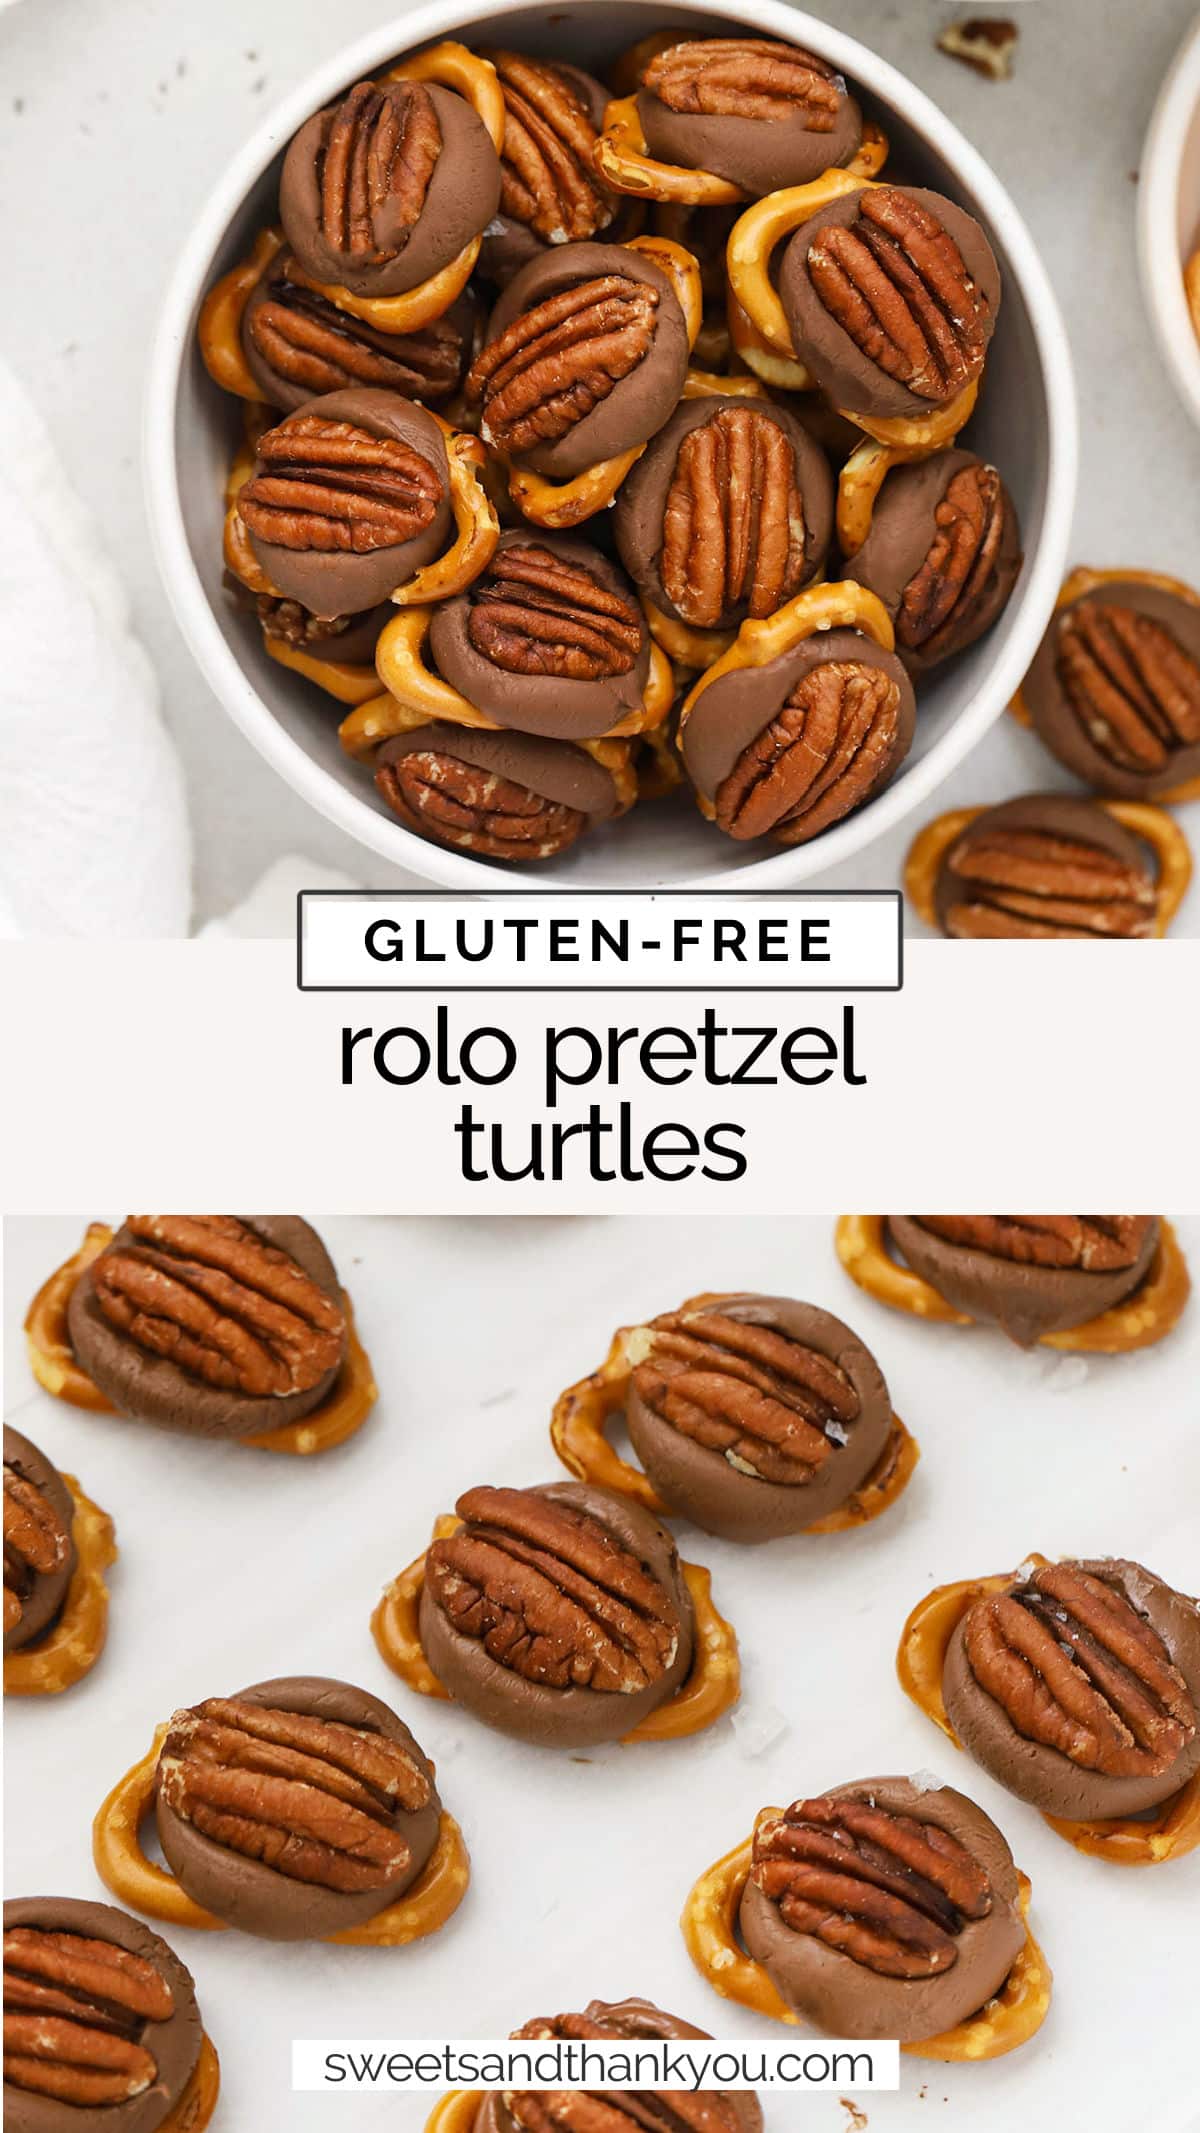 Let's make Gluten-Free Rolo Pretzels! This easy Rolo turtles recipe is the perfect easy holiday treat to add to your cookie plate this year! / gluten free rolo pretzel delights / gluten free rolo pretzel bites recipe / gluten free rolo pretzel turtles recipe / easy gluten-free holiday treat / gluten free cookie exchange recipe / gluten free holiday baking / gluten free christmas treat / gluten free rolo pretzel candy recipe